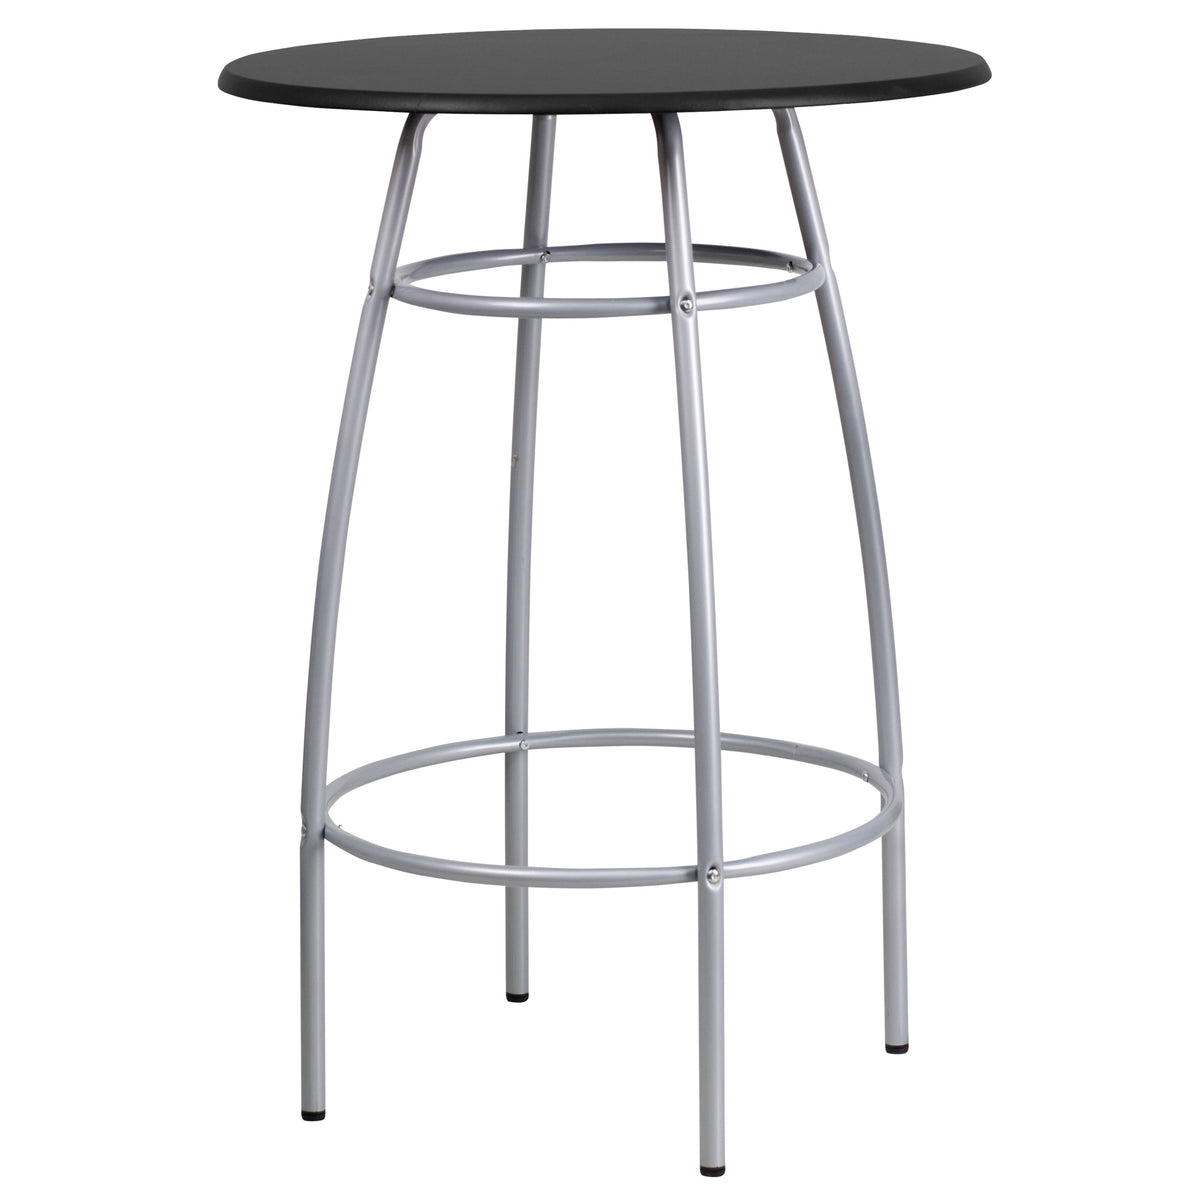 Bar Height Table Set with Backless Black Vinyl Upholstered Padded Stools